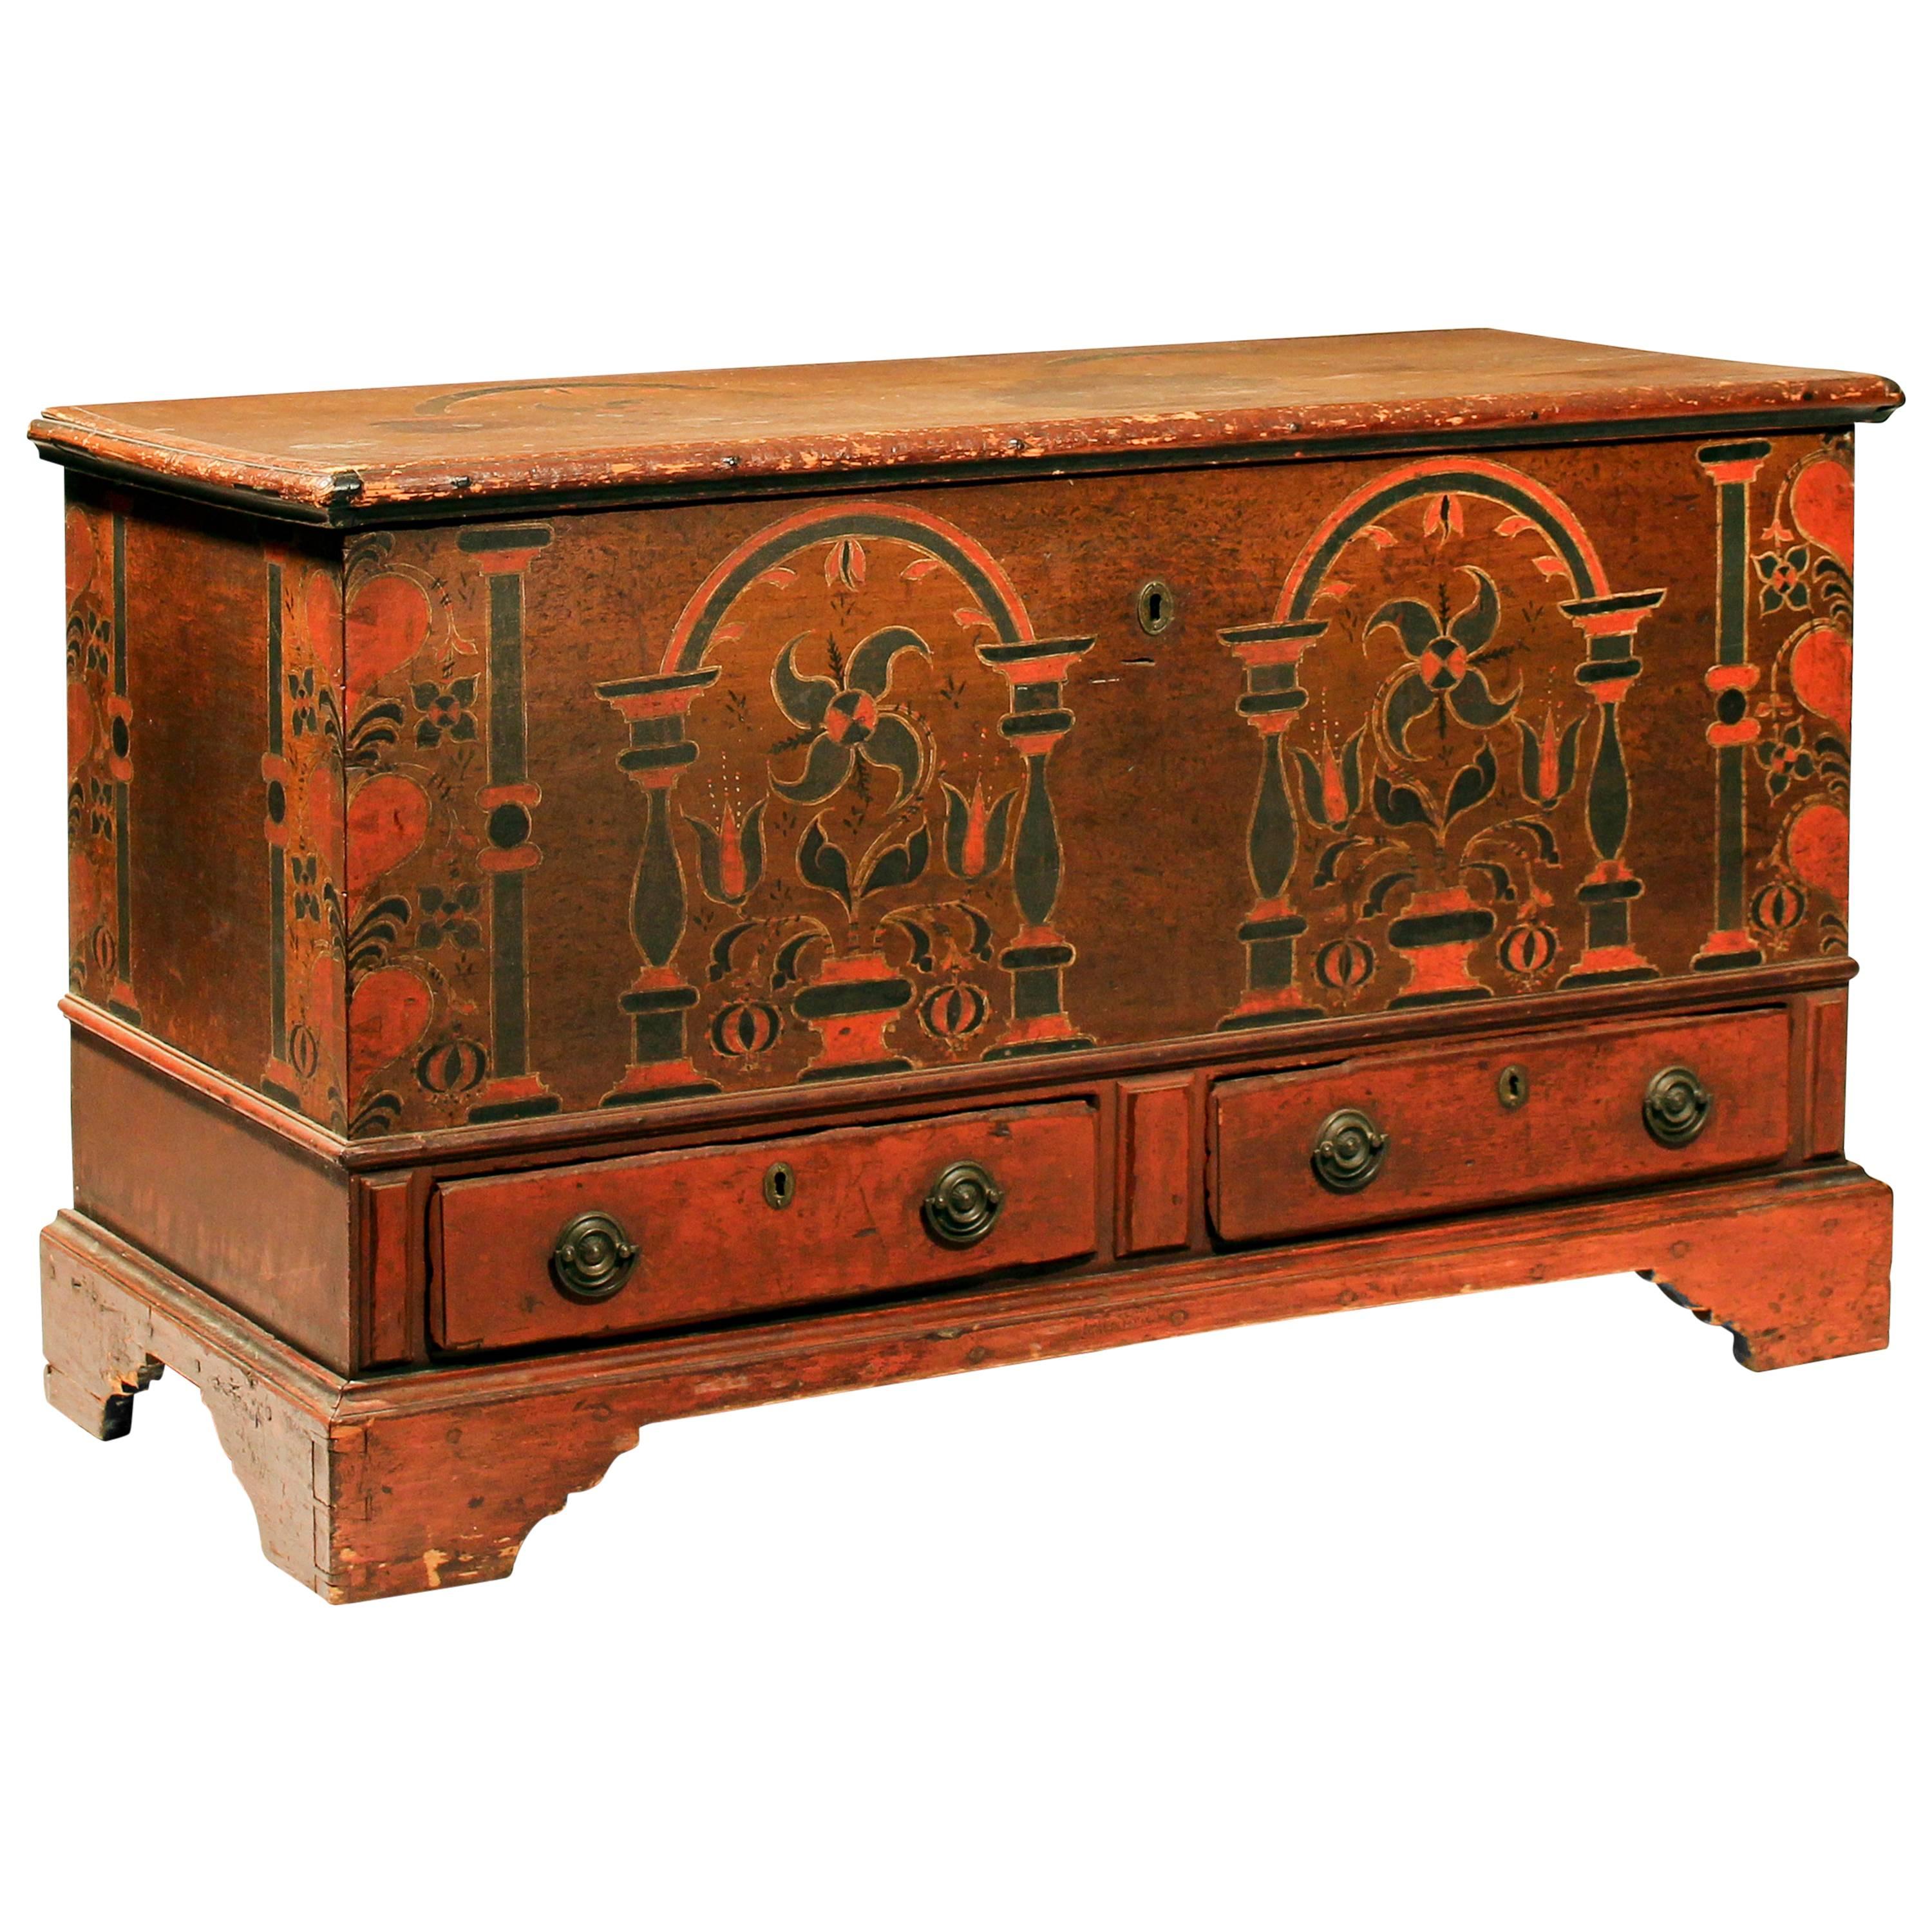 Rare and Vibrant Painted Blanket Chest For Sale